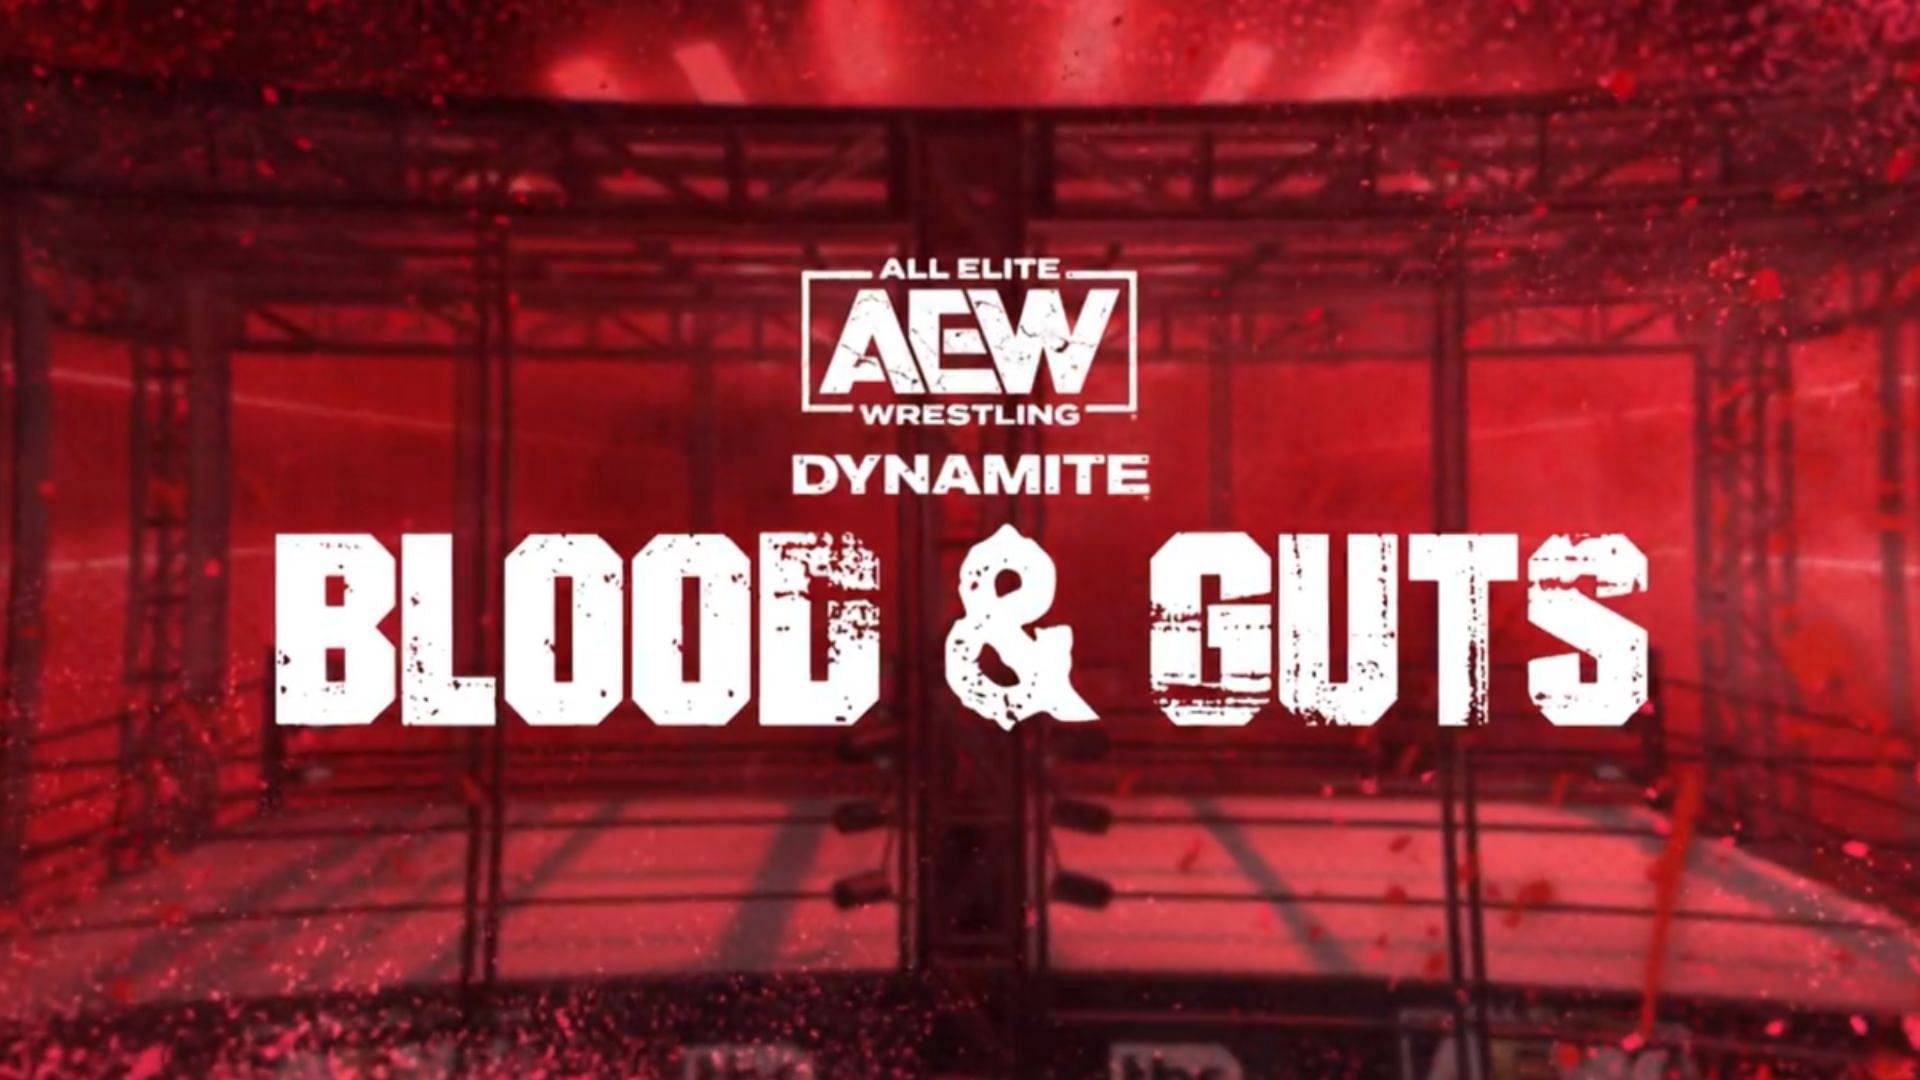 Find out which AEW star undefeated streak comes to an end?